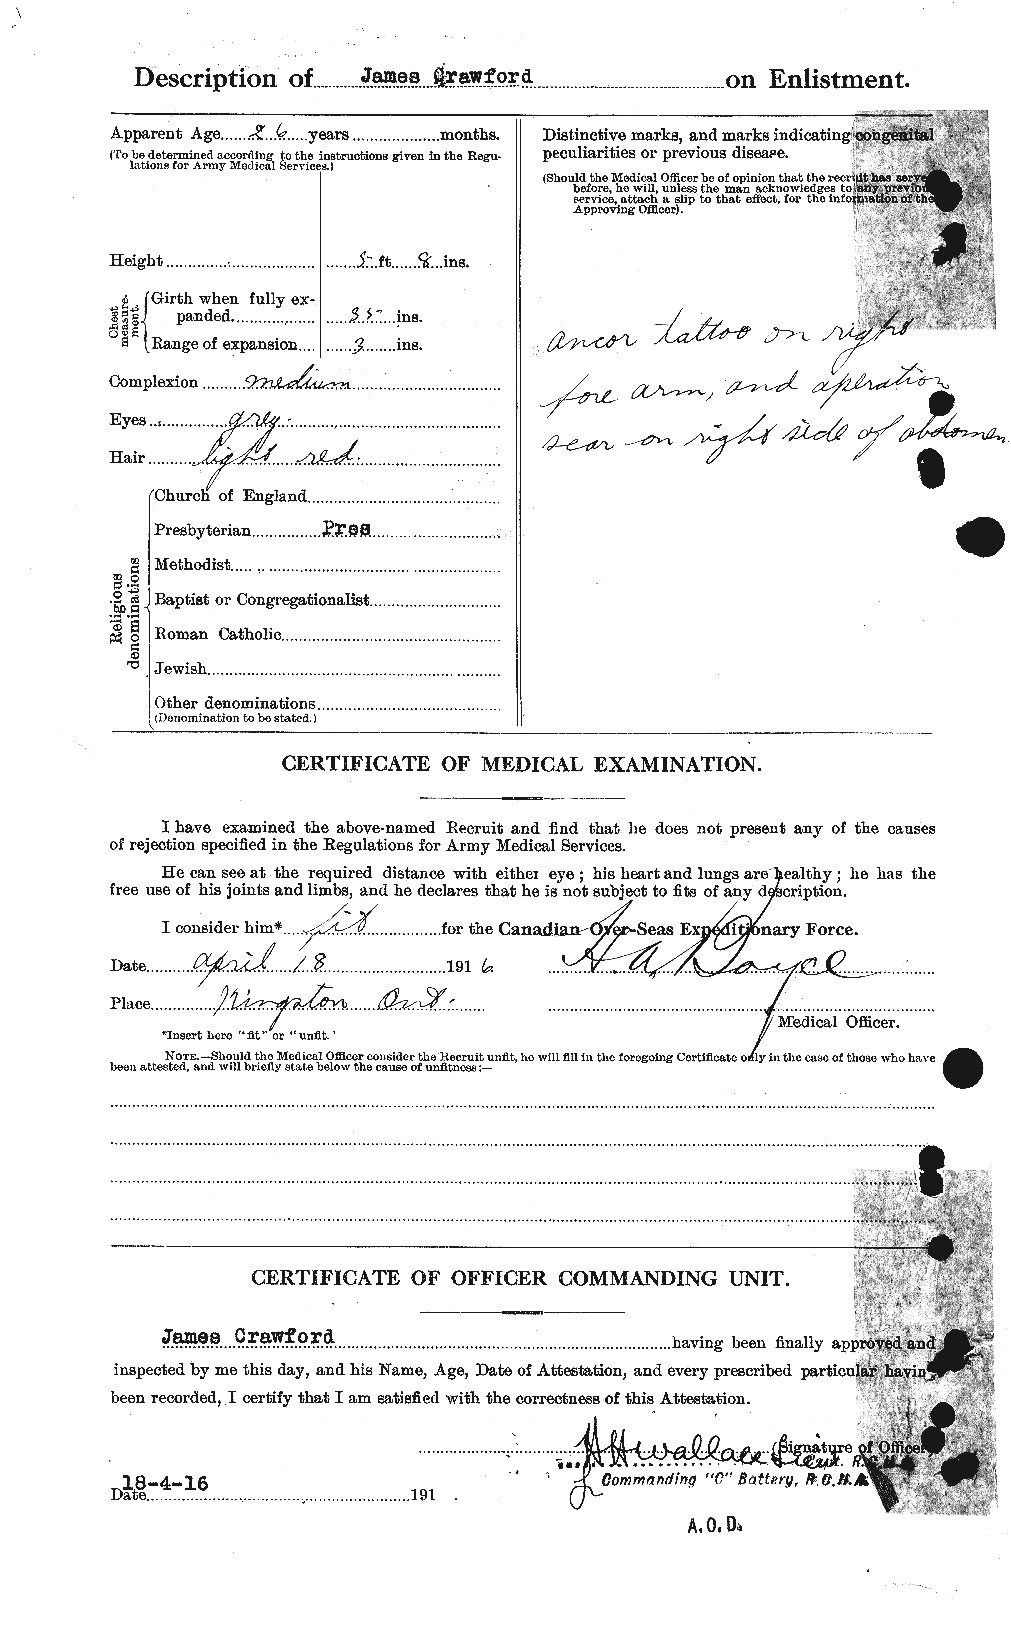 Personnel Records of the First World War - CEF 062772b